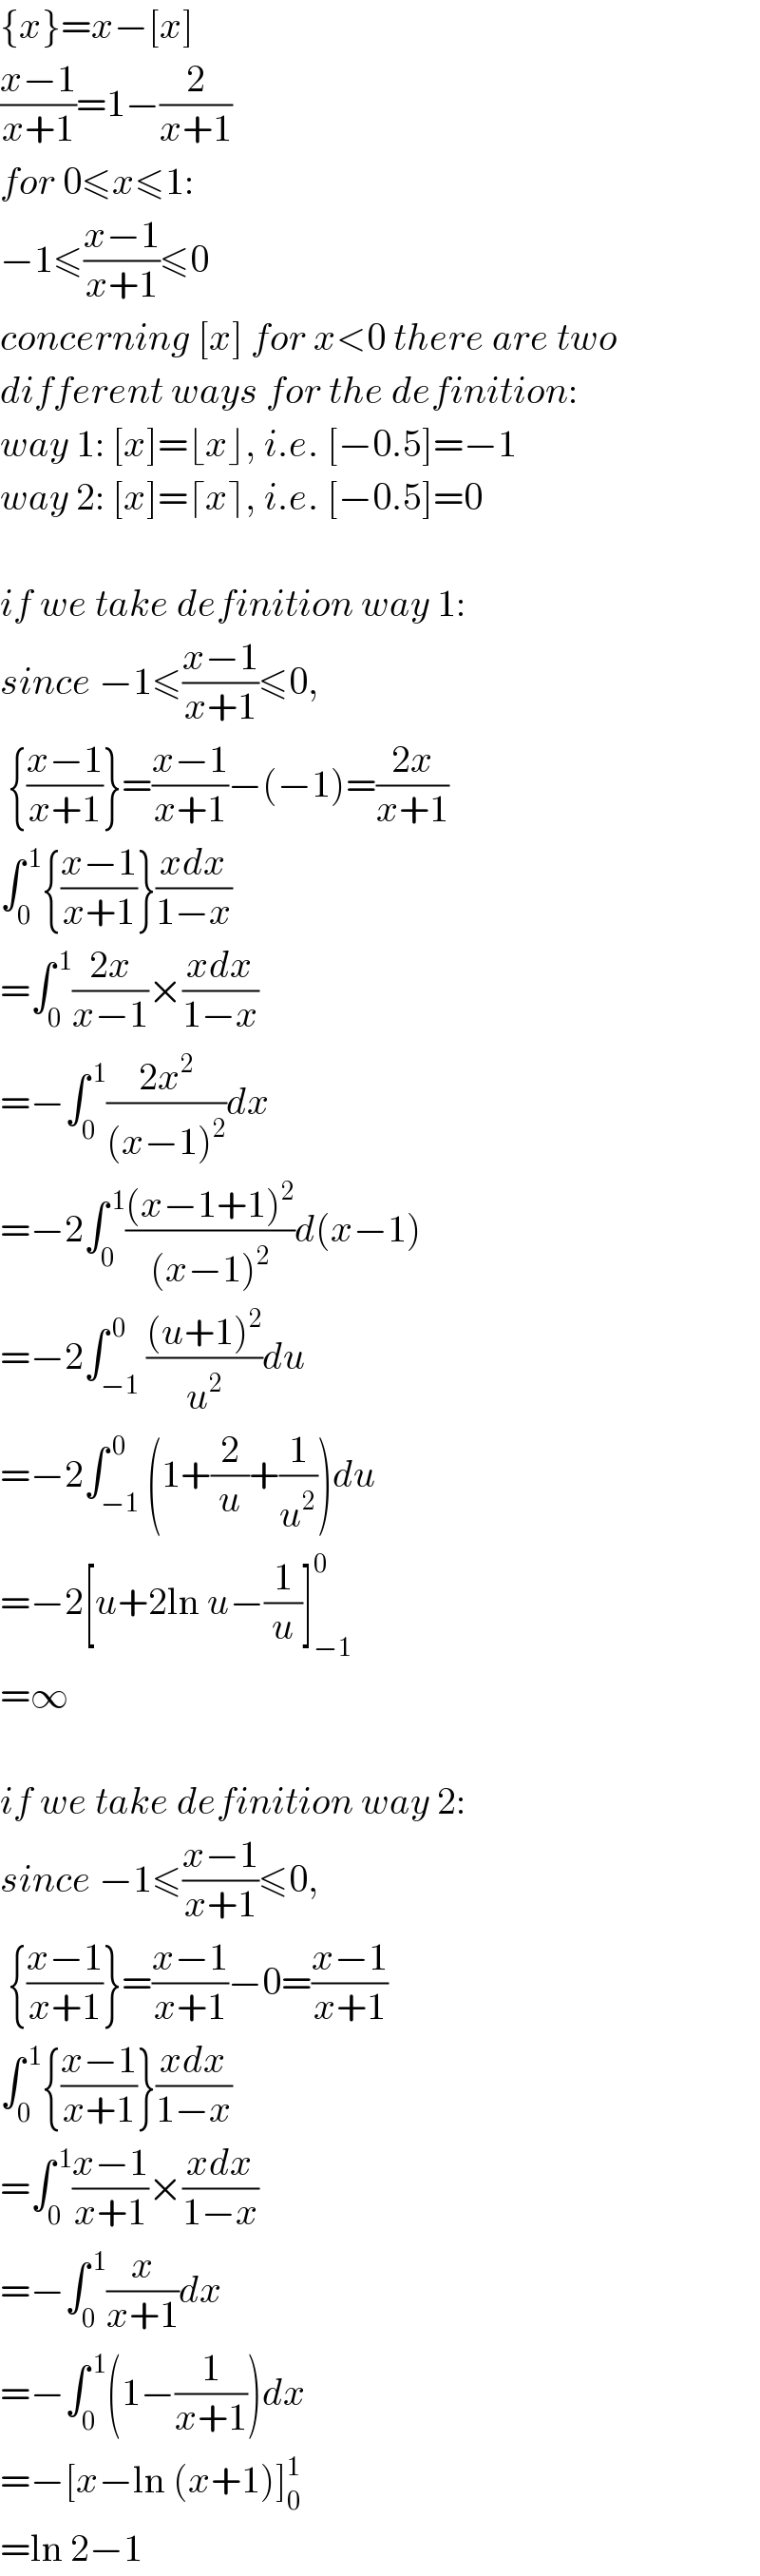 {x}=x−[x]  ((x−1)/(x+1))=1−(2/(x+1))  for 0≤x≤1:  −1≤((x−1)/(x+1))≤0  concerning [x] for x<0 there are two  different ways for the definition:  way 1: [x]=⌊x⌋, i.e. [−0.5]=−1  way 2: [x]=⌈x⌉, i.e. [−0.5]=0    if we take definition way 1:  since −1≤((x−1)/(x+1))≤0,    {((x−1)/(x+1))}=((x−1)/(x+1))−(−1)=((2x)/(x+1))  ∫_0 ^( 1) {((x−1)/(x+1))}((xdx)/(1−x))  =∫_0 ^( 1) ((2x)/(x−1))×((xdx)/(1−x))  =−∫_0 ^( 1) ((2x^2 )/((x−1)^2 ))dx  =−2∫_0 ^( 1) (((x−1+1)^2 )/((x−1)^2 ))d(x−1)  =−2∫_(−1) ^( 0) (((u+1)^2 )/u^2 )du  =−2∫_(−1) ^( 0) (1+(2/u)+(1/u^2 ))du  =−2[u+2ln u−(1/u)]_(−1) ^0   =∞    if we take definition way 2:  since −1≤((x−1)/(x+1))≤0,    {((x−1)/(x+1))}=((x−1)/(x+1))−0=((x−1)/(x+1))  ∫_0 ^( 1) {((x−1)/(x+1))}((xdx)/(1−x))  =∫_0 ^( 1) ((x−1)/(x+1))×((xdx)/(1−x))  =−∫_0 ^( 1) (x/(x+1))dx  =−∫_0 ^( 1) (1−(1/(x+1)))dx  =−[x−ln (x+1)]_0 ^1   =ln 2−1  